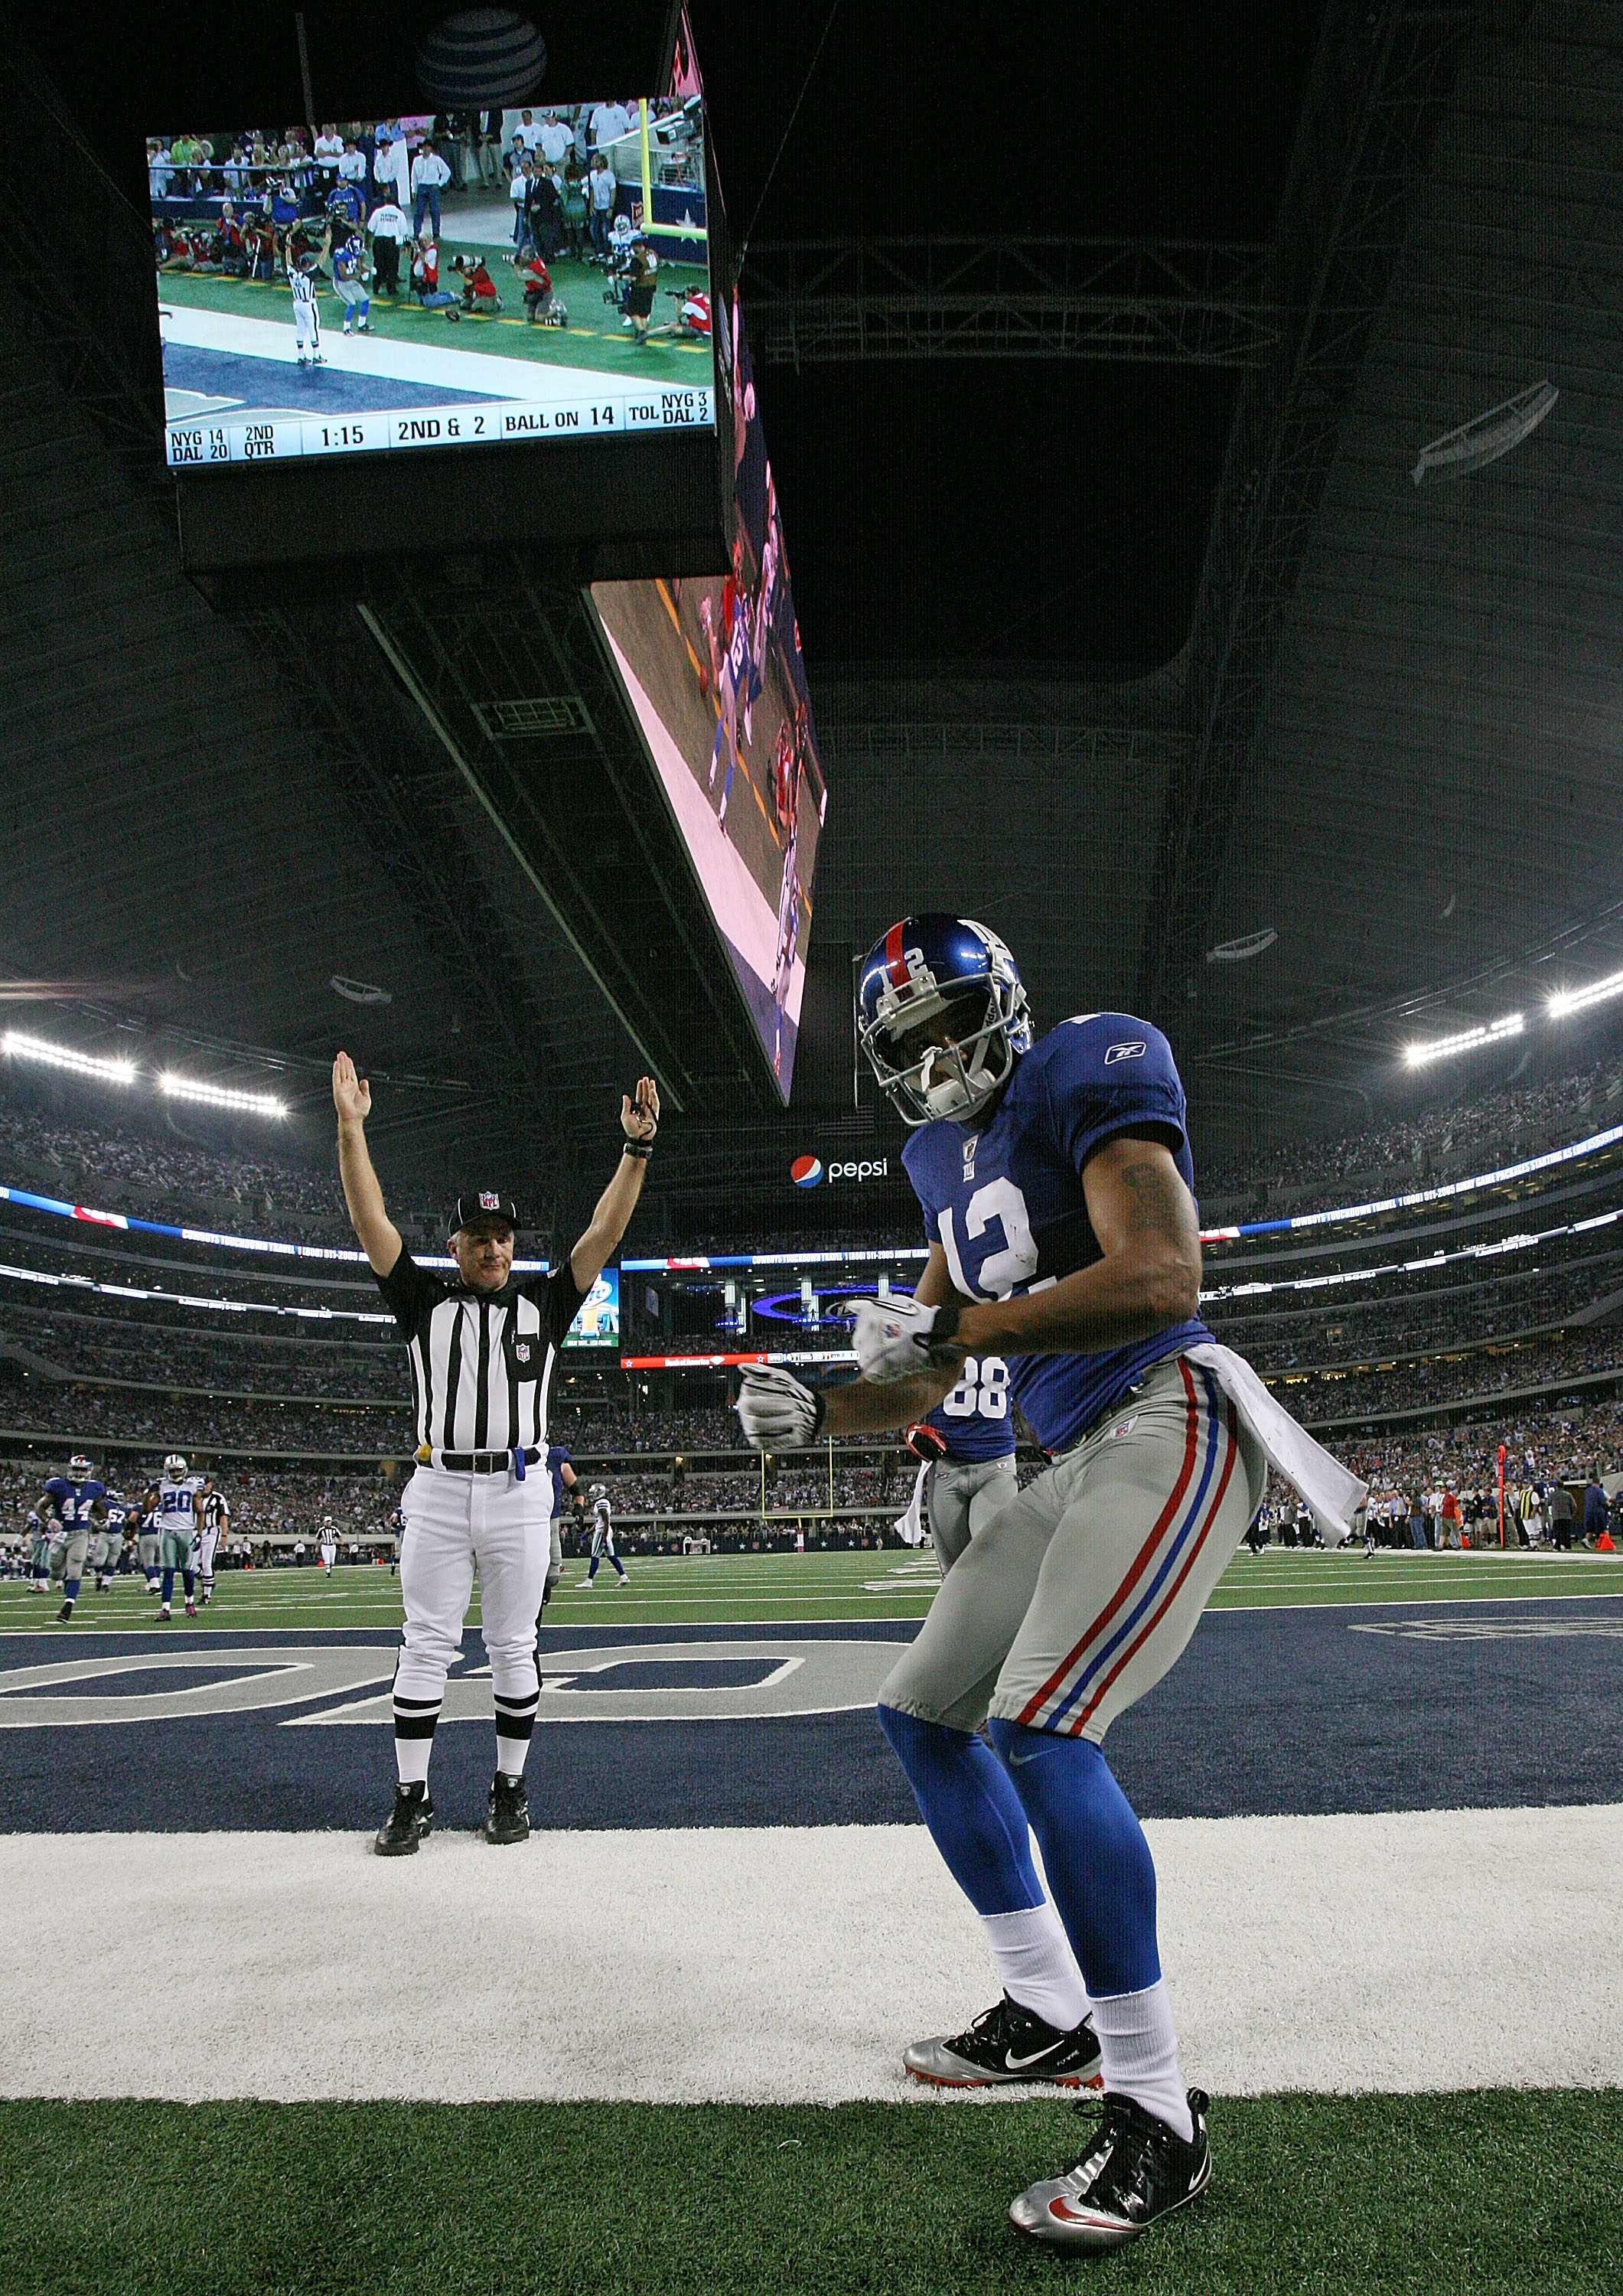 ARLINGTON, TX - OCTOBER 25:  Wide receiver Steve Smith #12 of the New York Giants celebrates a touchdown against the Dallas Cowboys in the second quarter at Cowboys Stadium on October 25, 2010 in Arlington, Texas.  (Photo by Ronald Martinez/Getty Images)